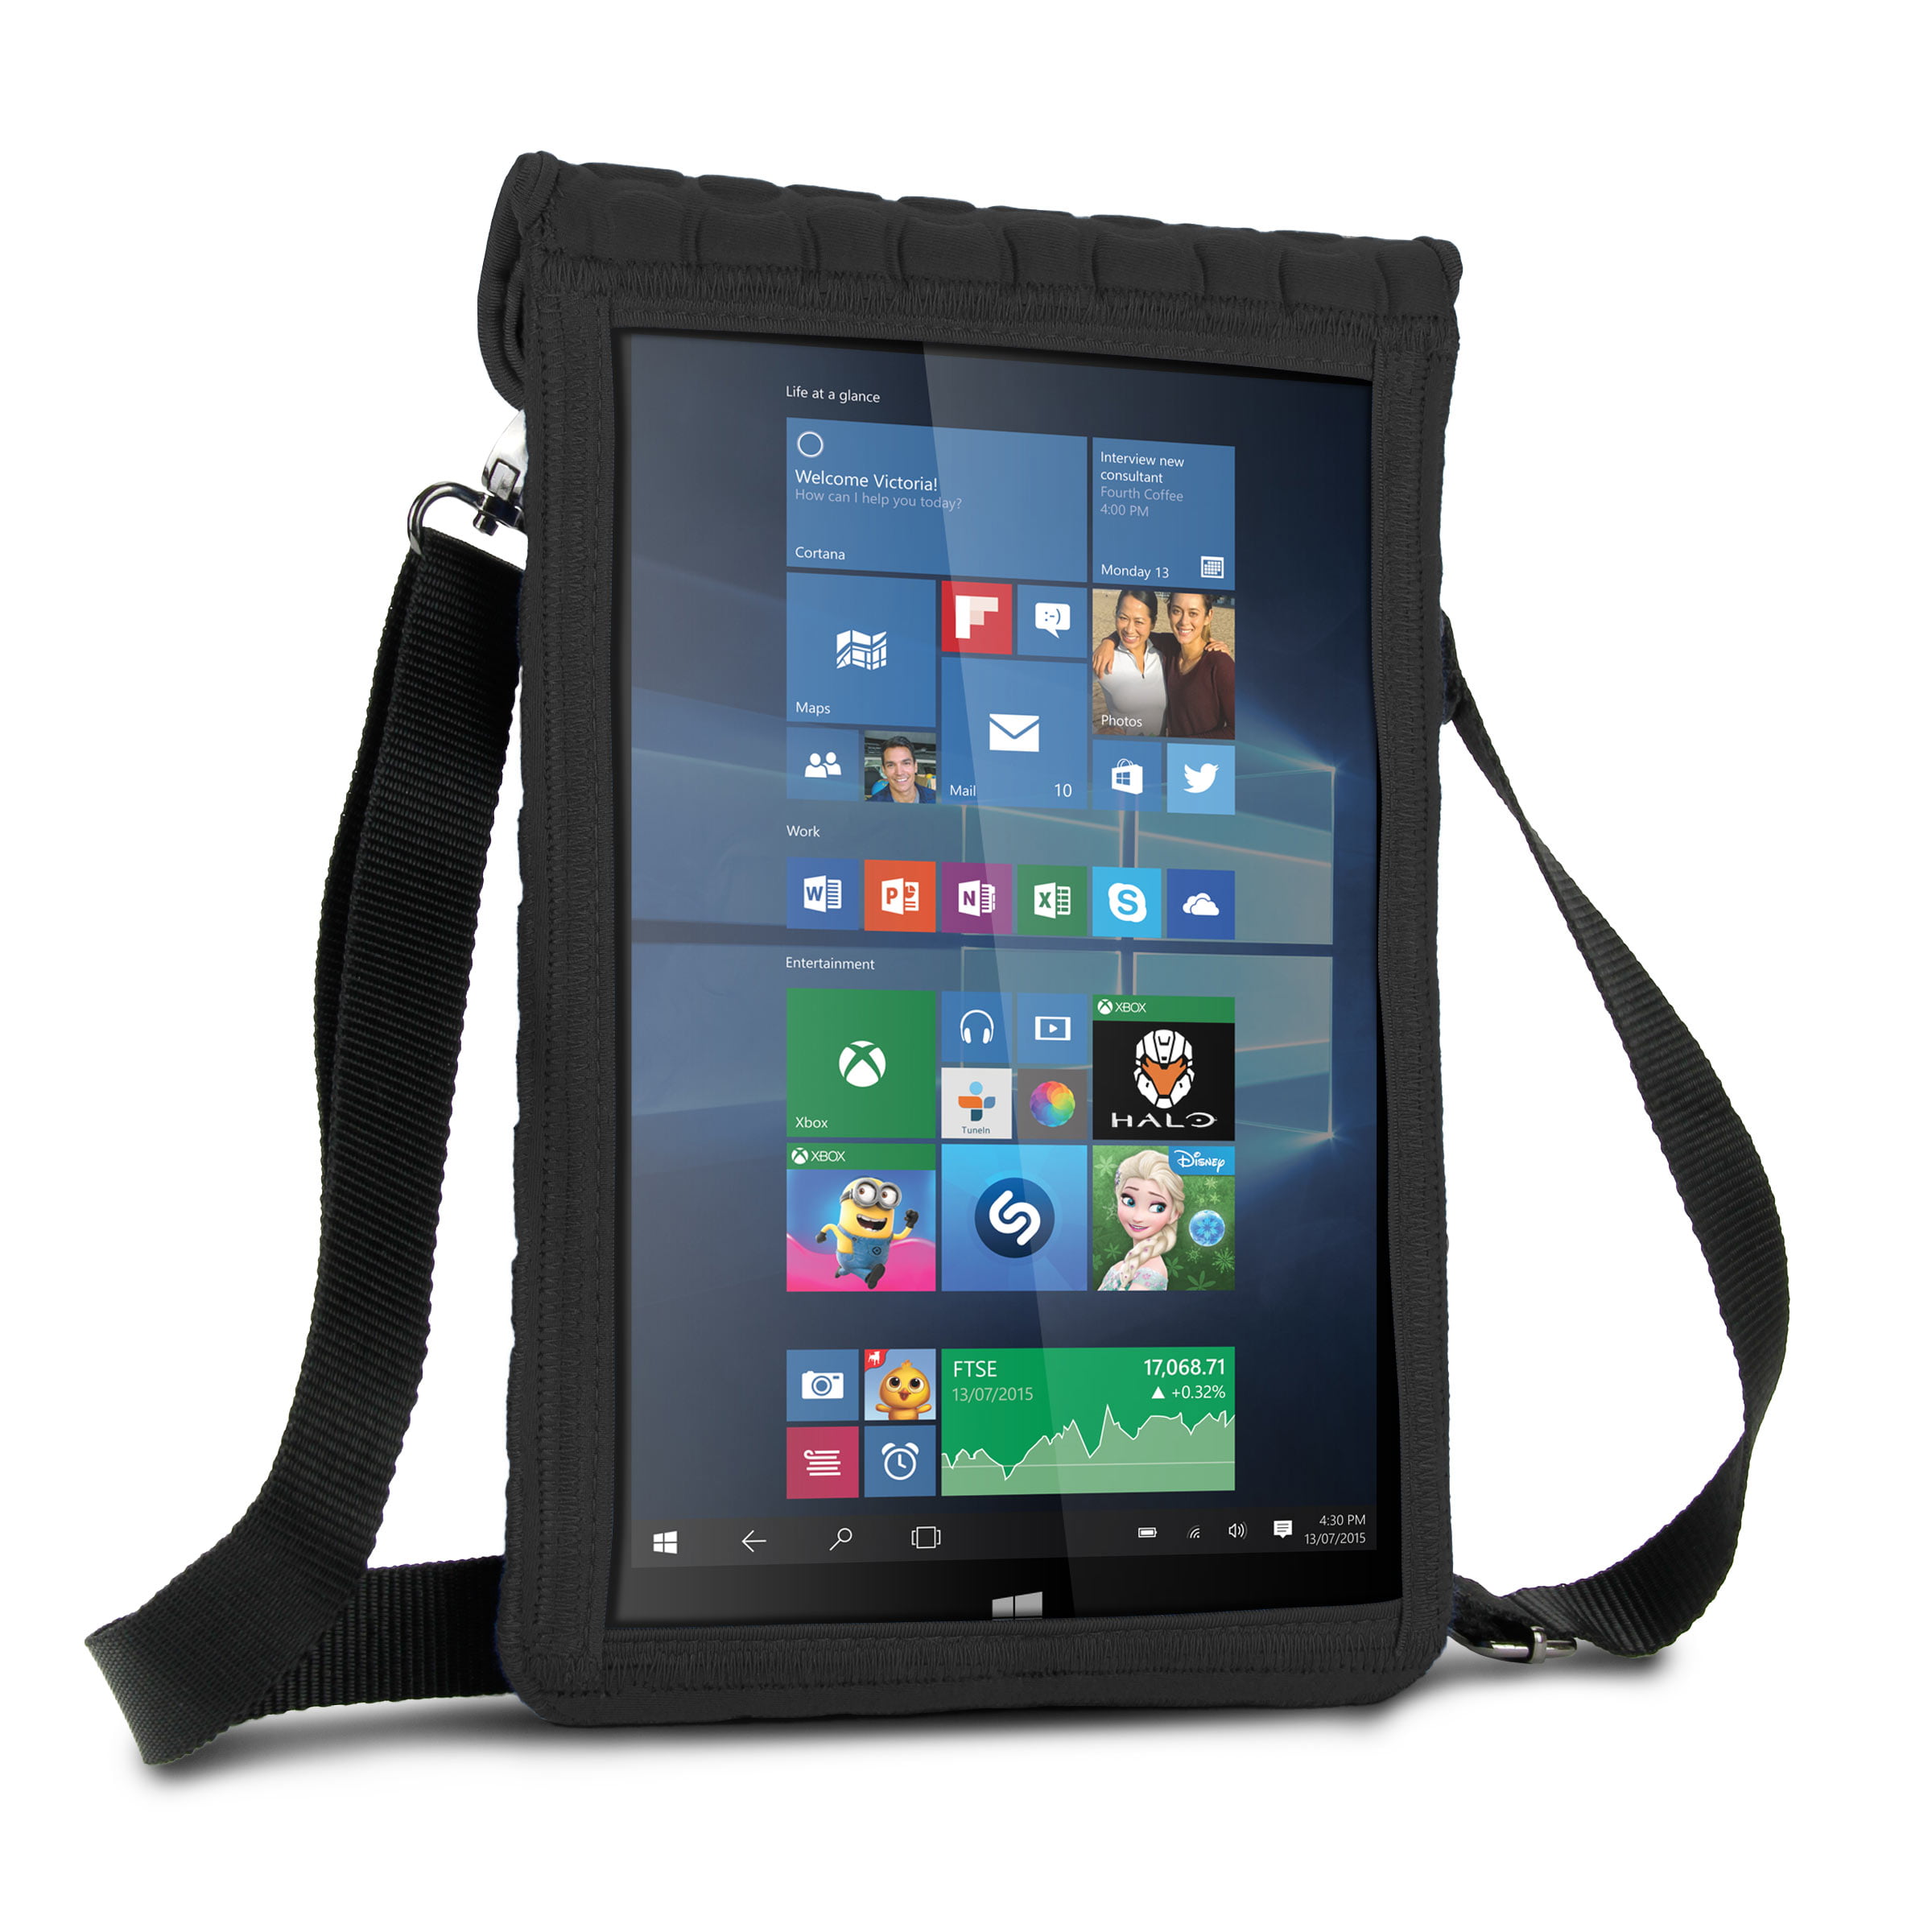 USA GEAR 10 inch Tablet Case Cover with Builtin Touch Capacitive Screen Protector, Adjustable